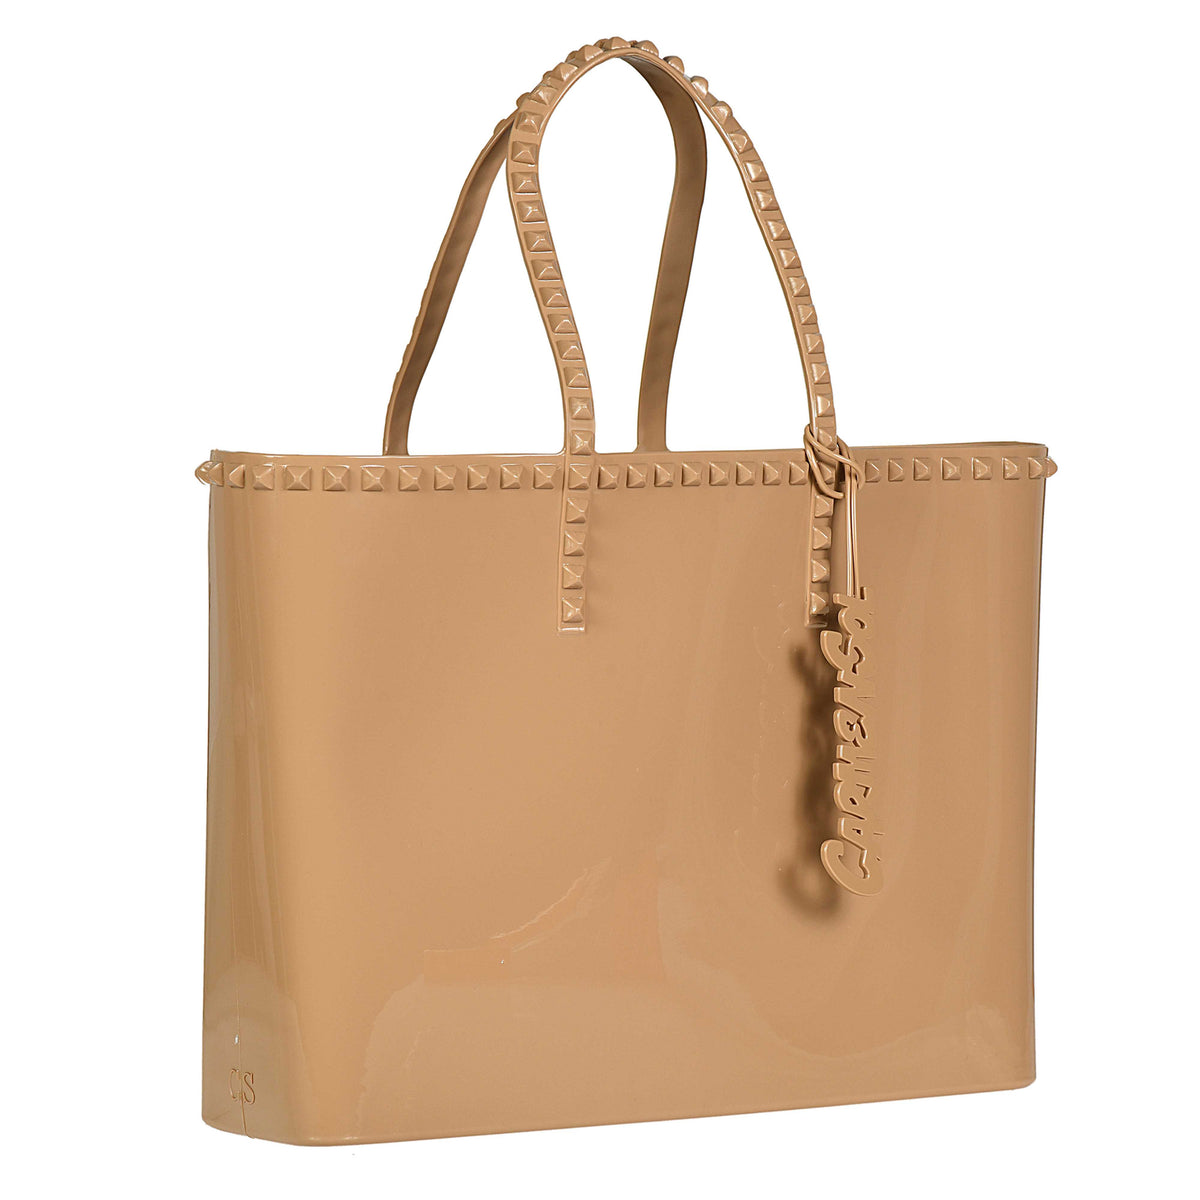 Nude large tote bags from Carmen Sol